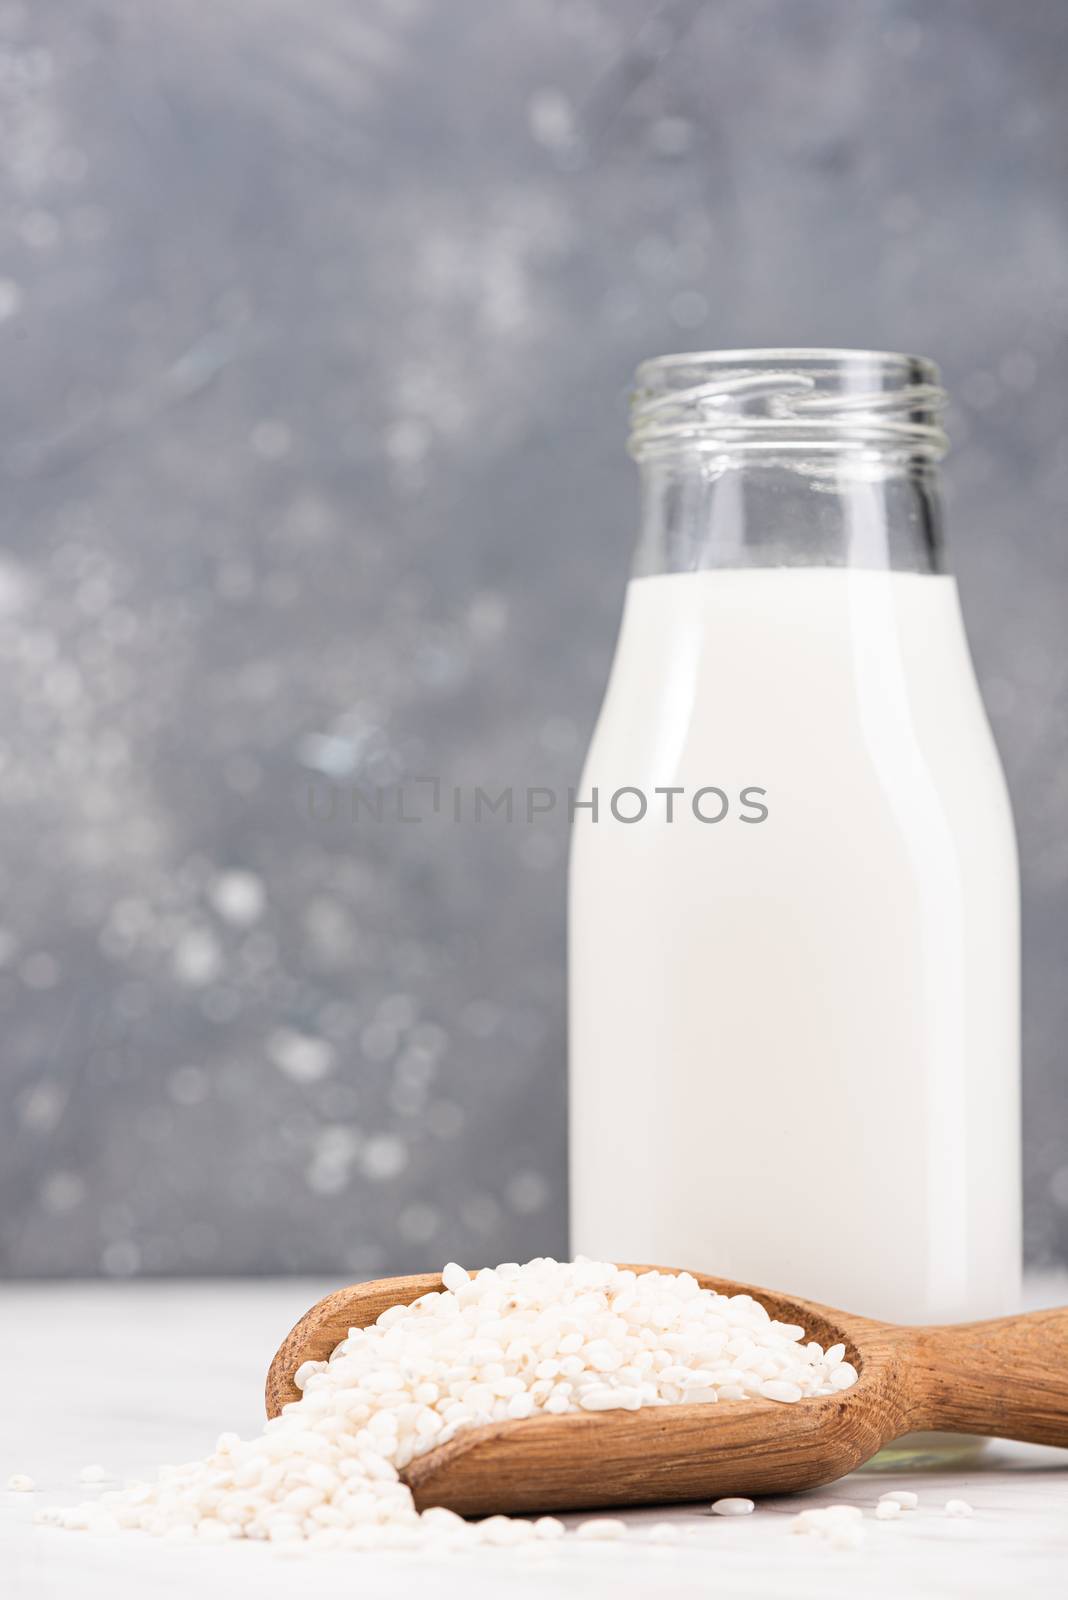 Alternative Non Dairy Rice Milk. Diet and Nutrition Concept by merc67